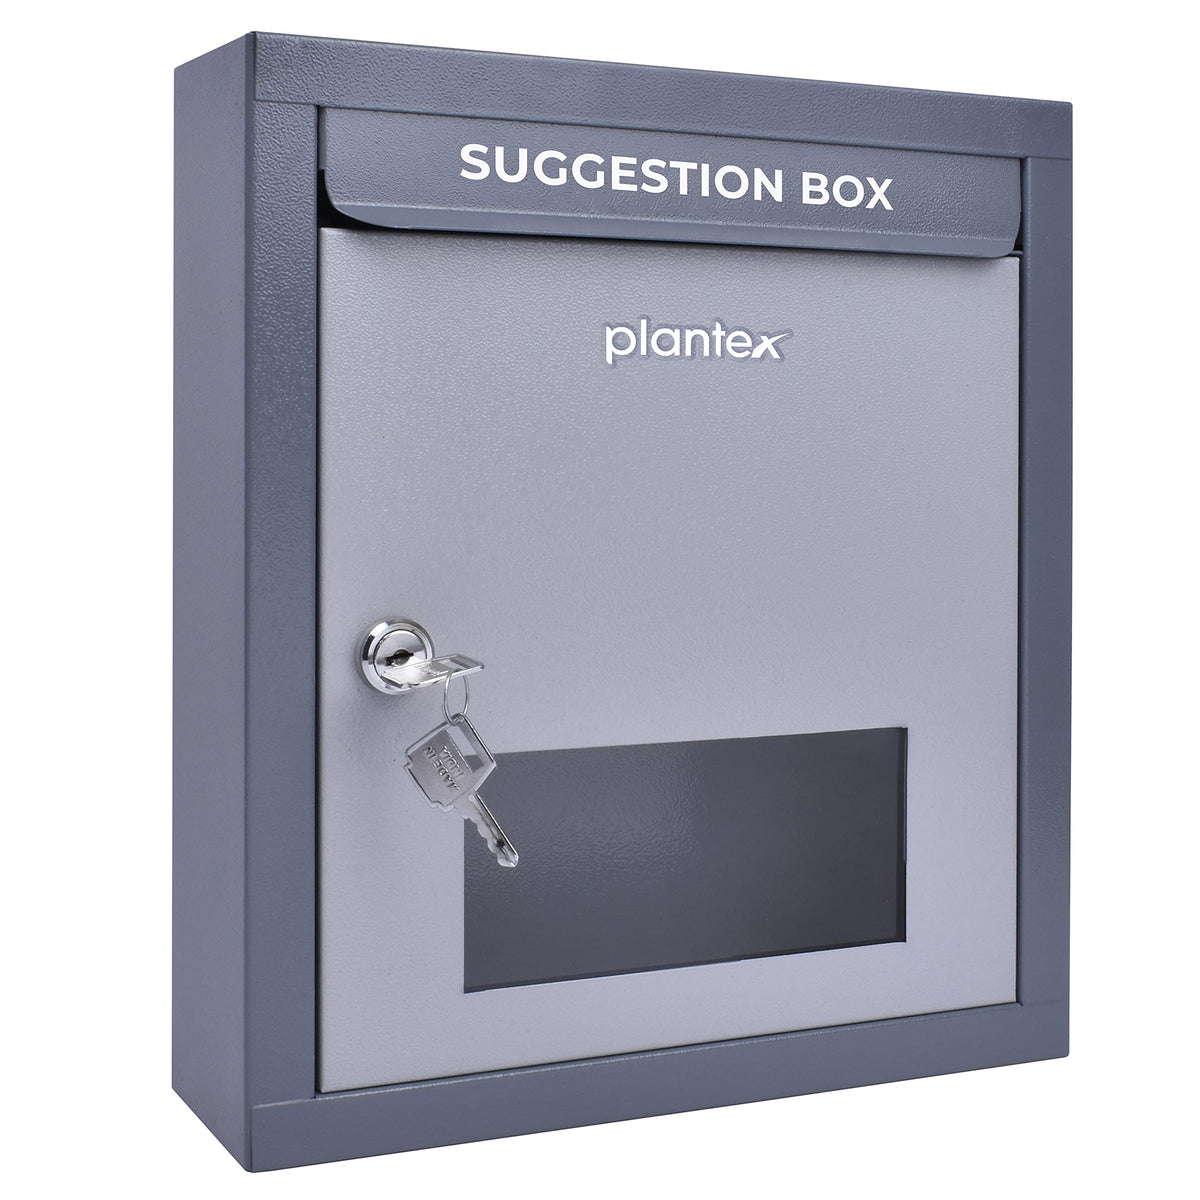 Plantex All in 1 Multipurpose Letter/Suggestion Box/Complaint /Donation Box with Lock Table Top or Wall Mount (Grey)